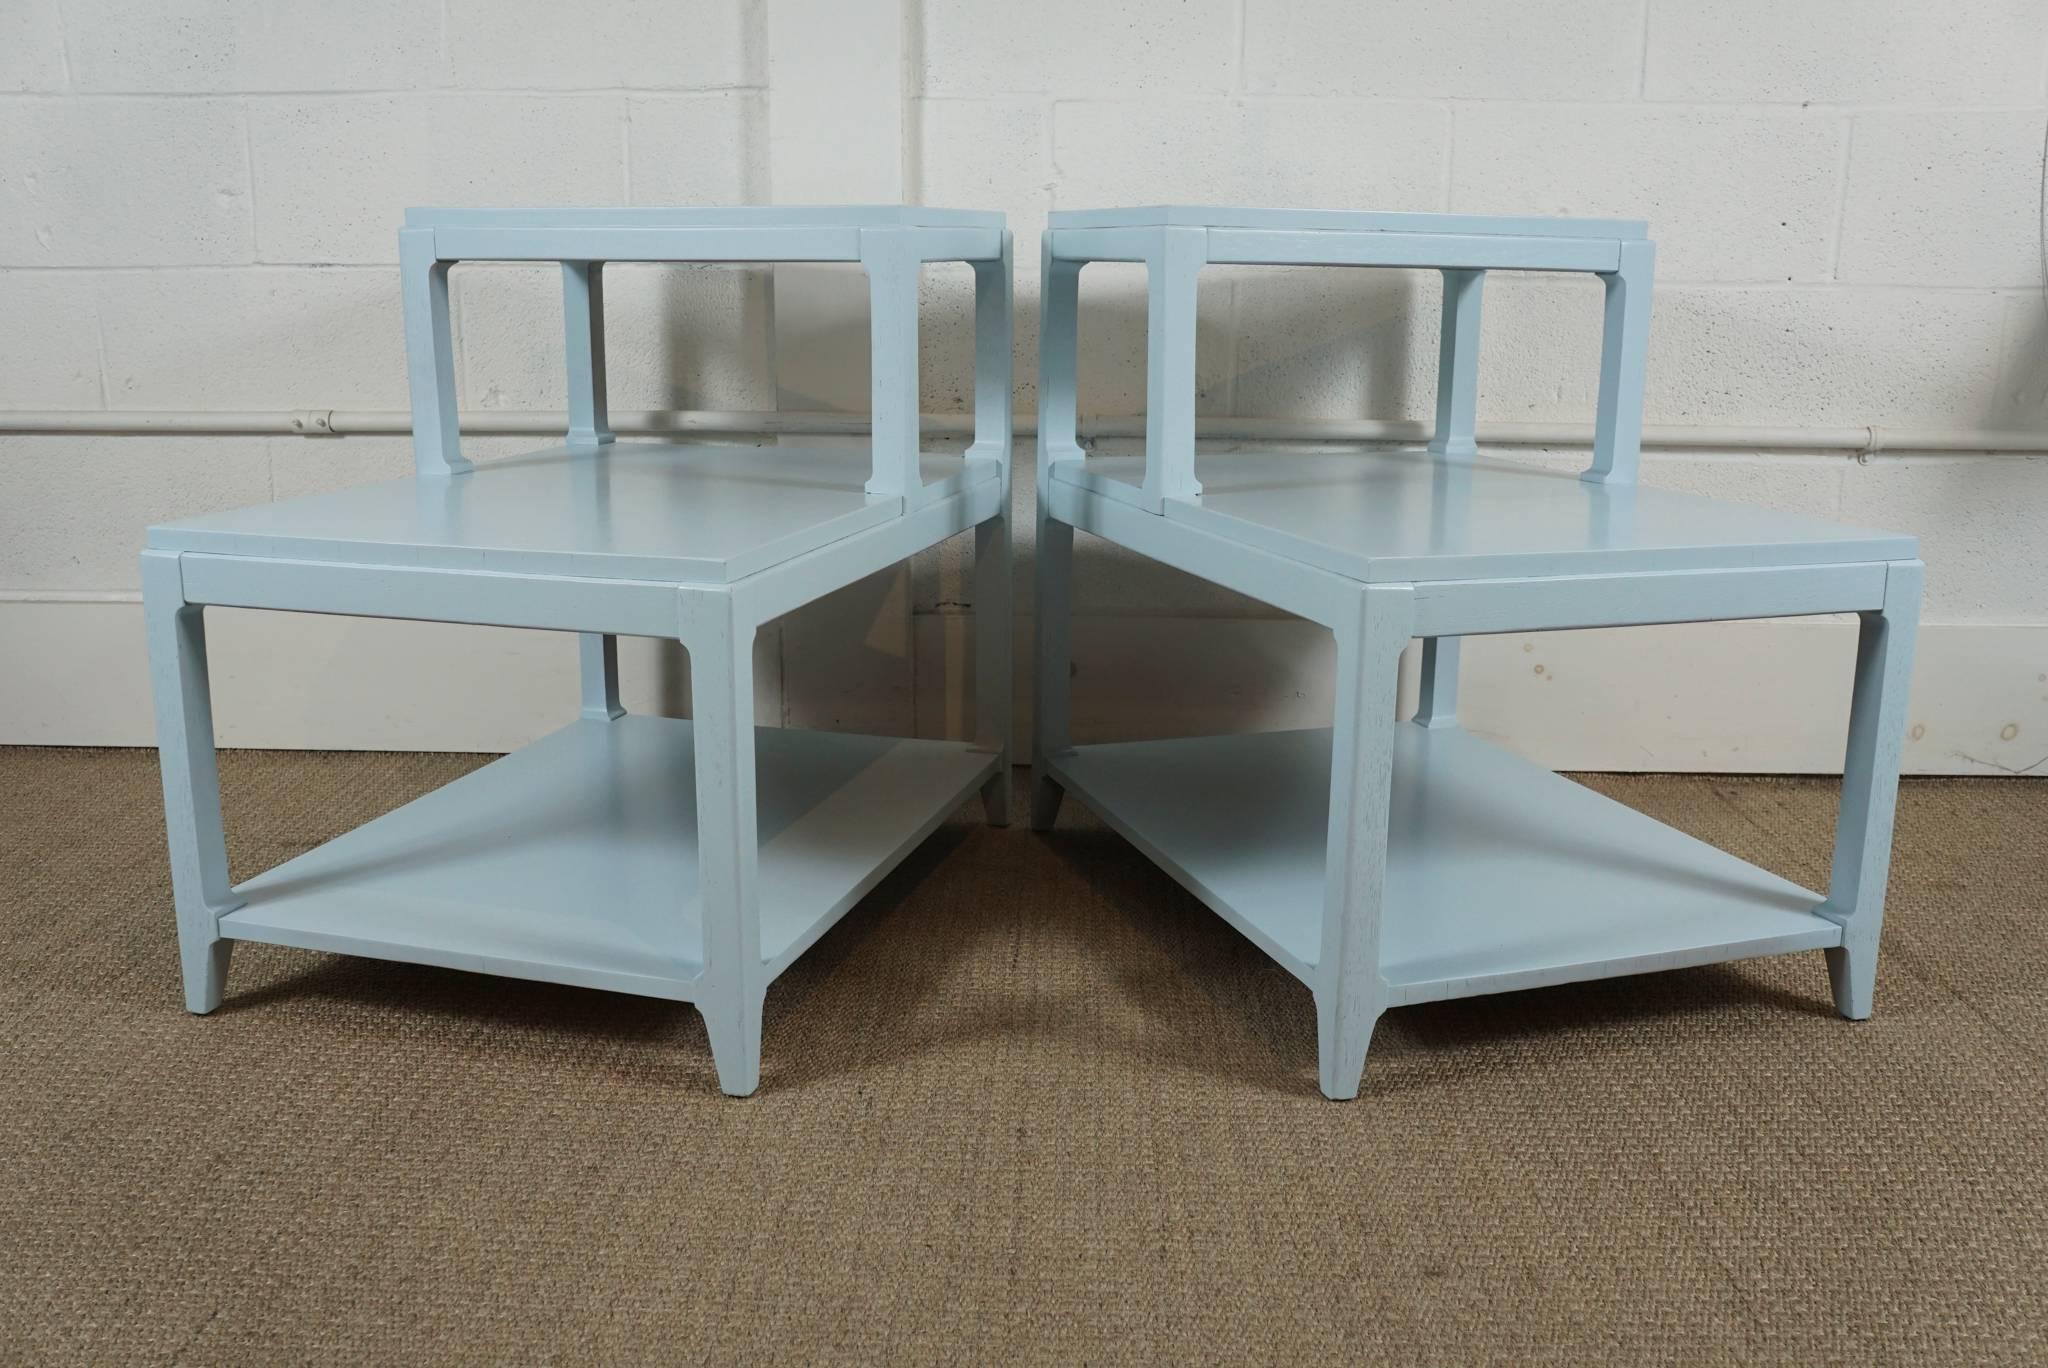 Here is a pair of modern stepped end tables that have been painted in a pale blue. The top shelf is 13 inches deep and the bottom shelf is 16 inches high.